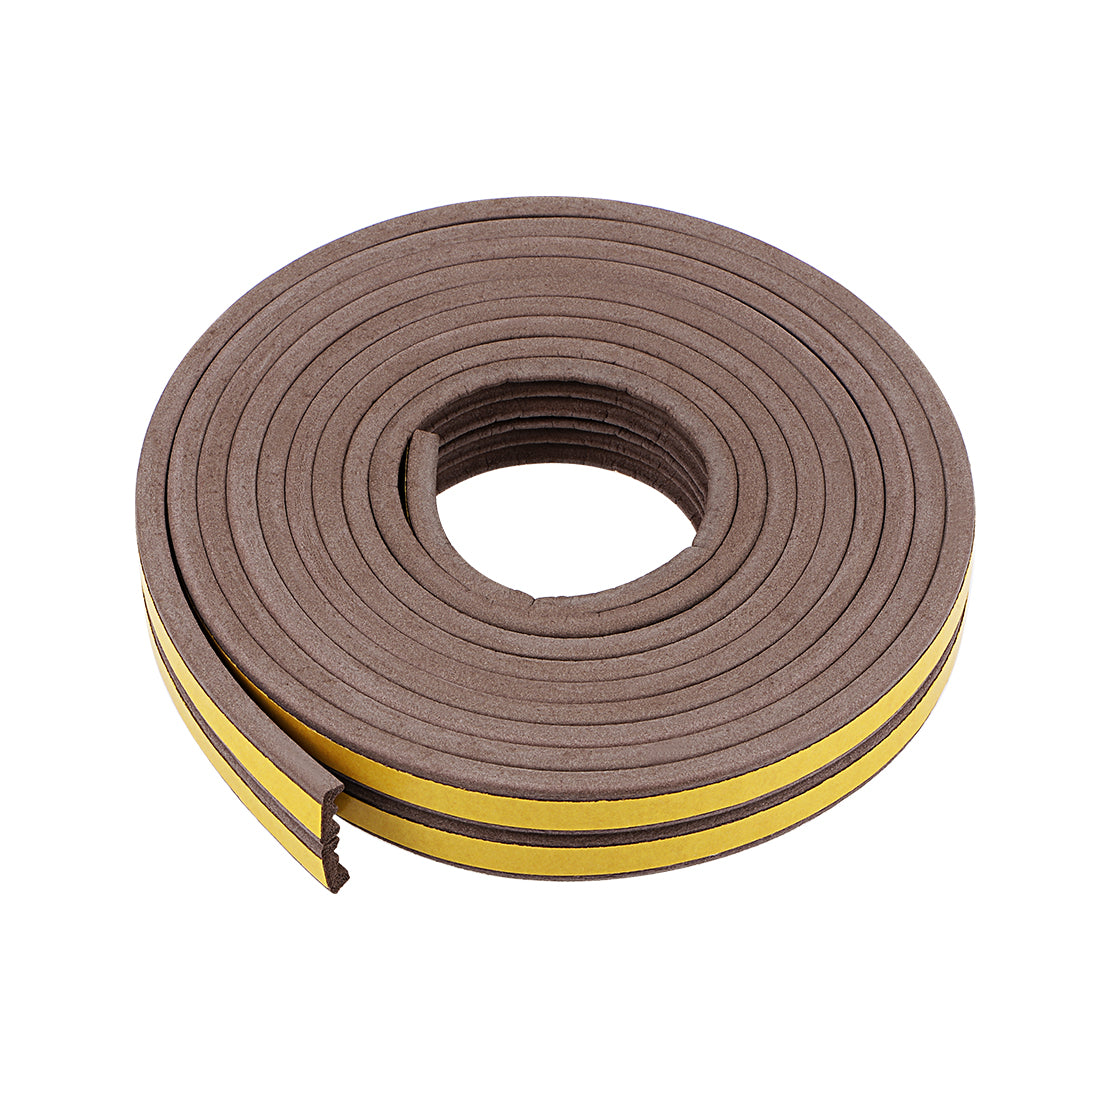 uxcell Uxcell Foam Seal Strip Adhesive Tape 9mm Width 4mm Thick, 2.5 Meters  Brown, Pcs